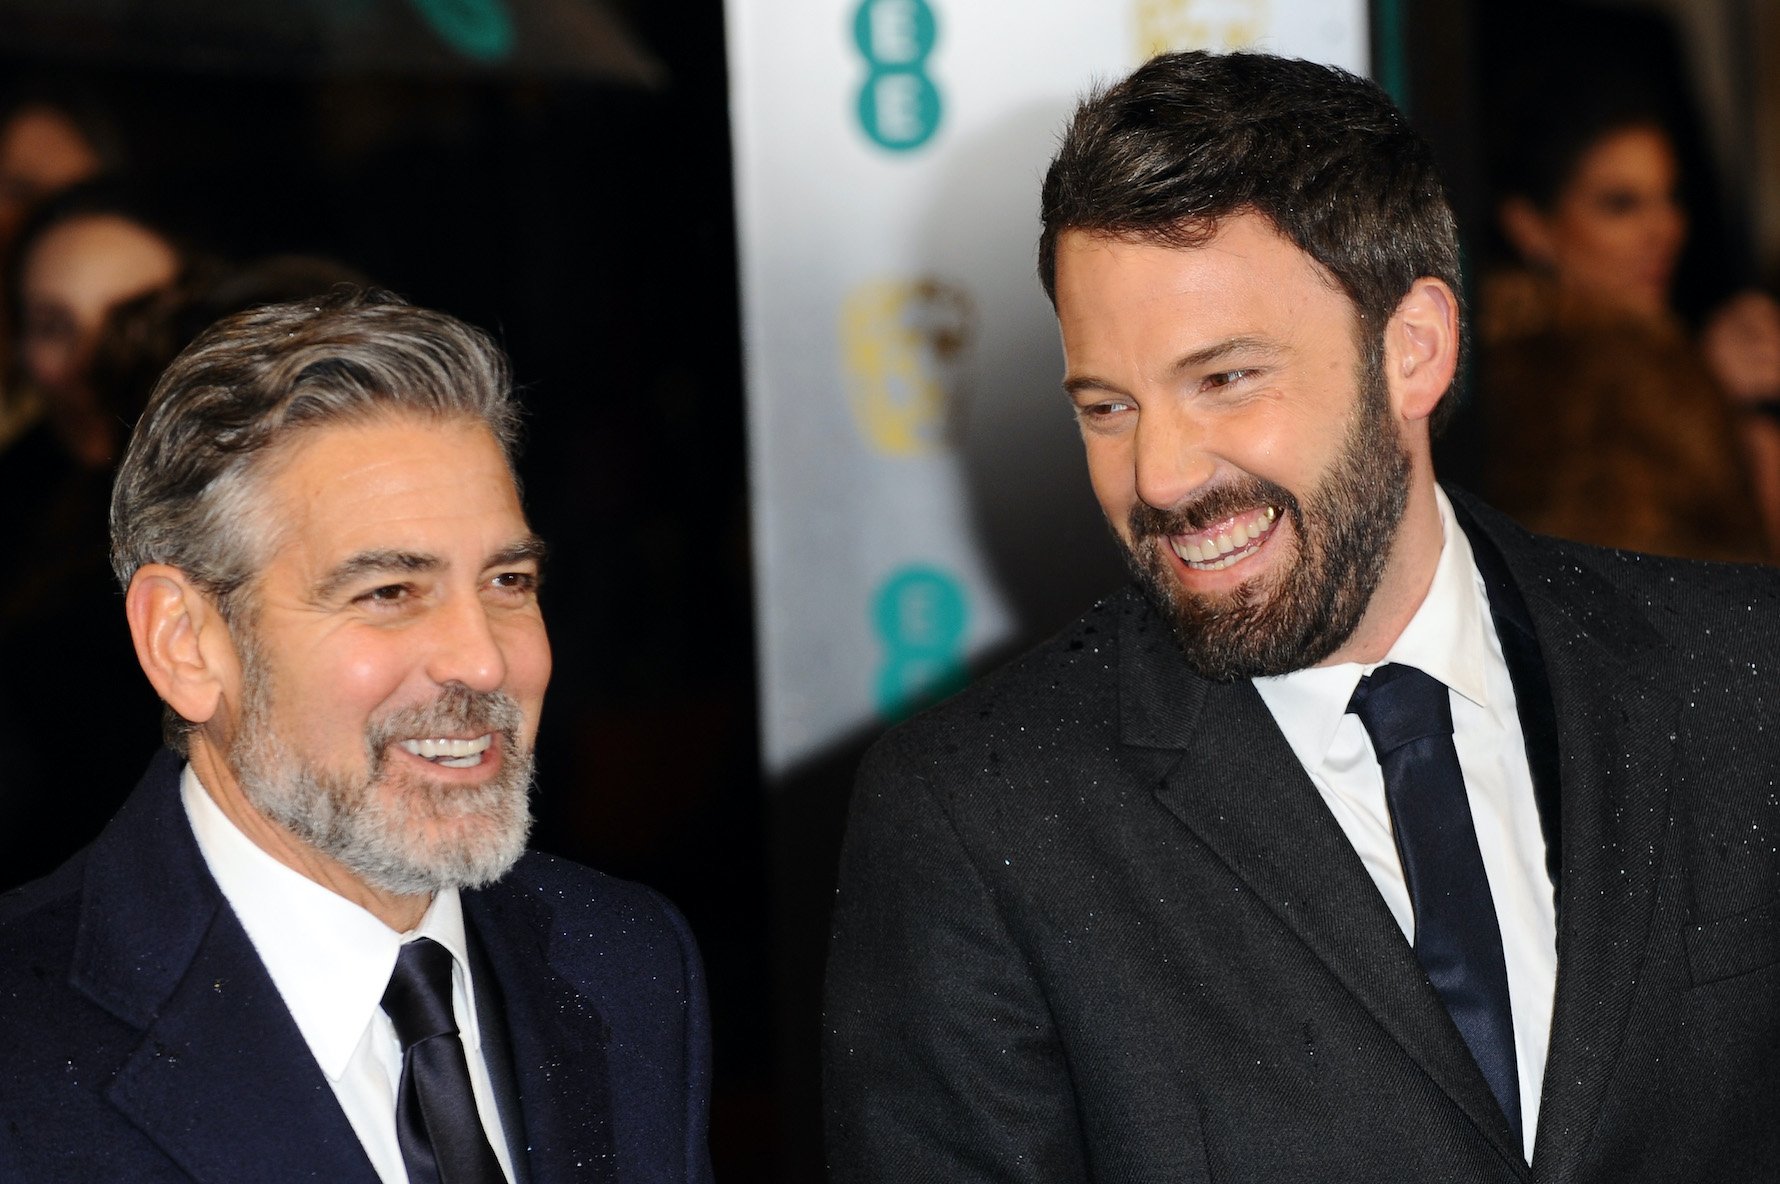 George Clooney and Ben Affleck at the 2013 EE British Academy